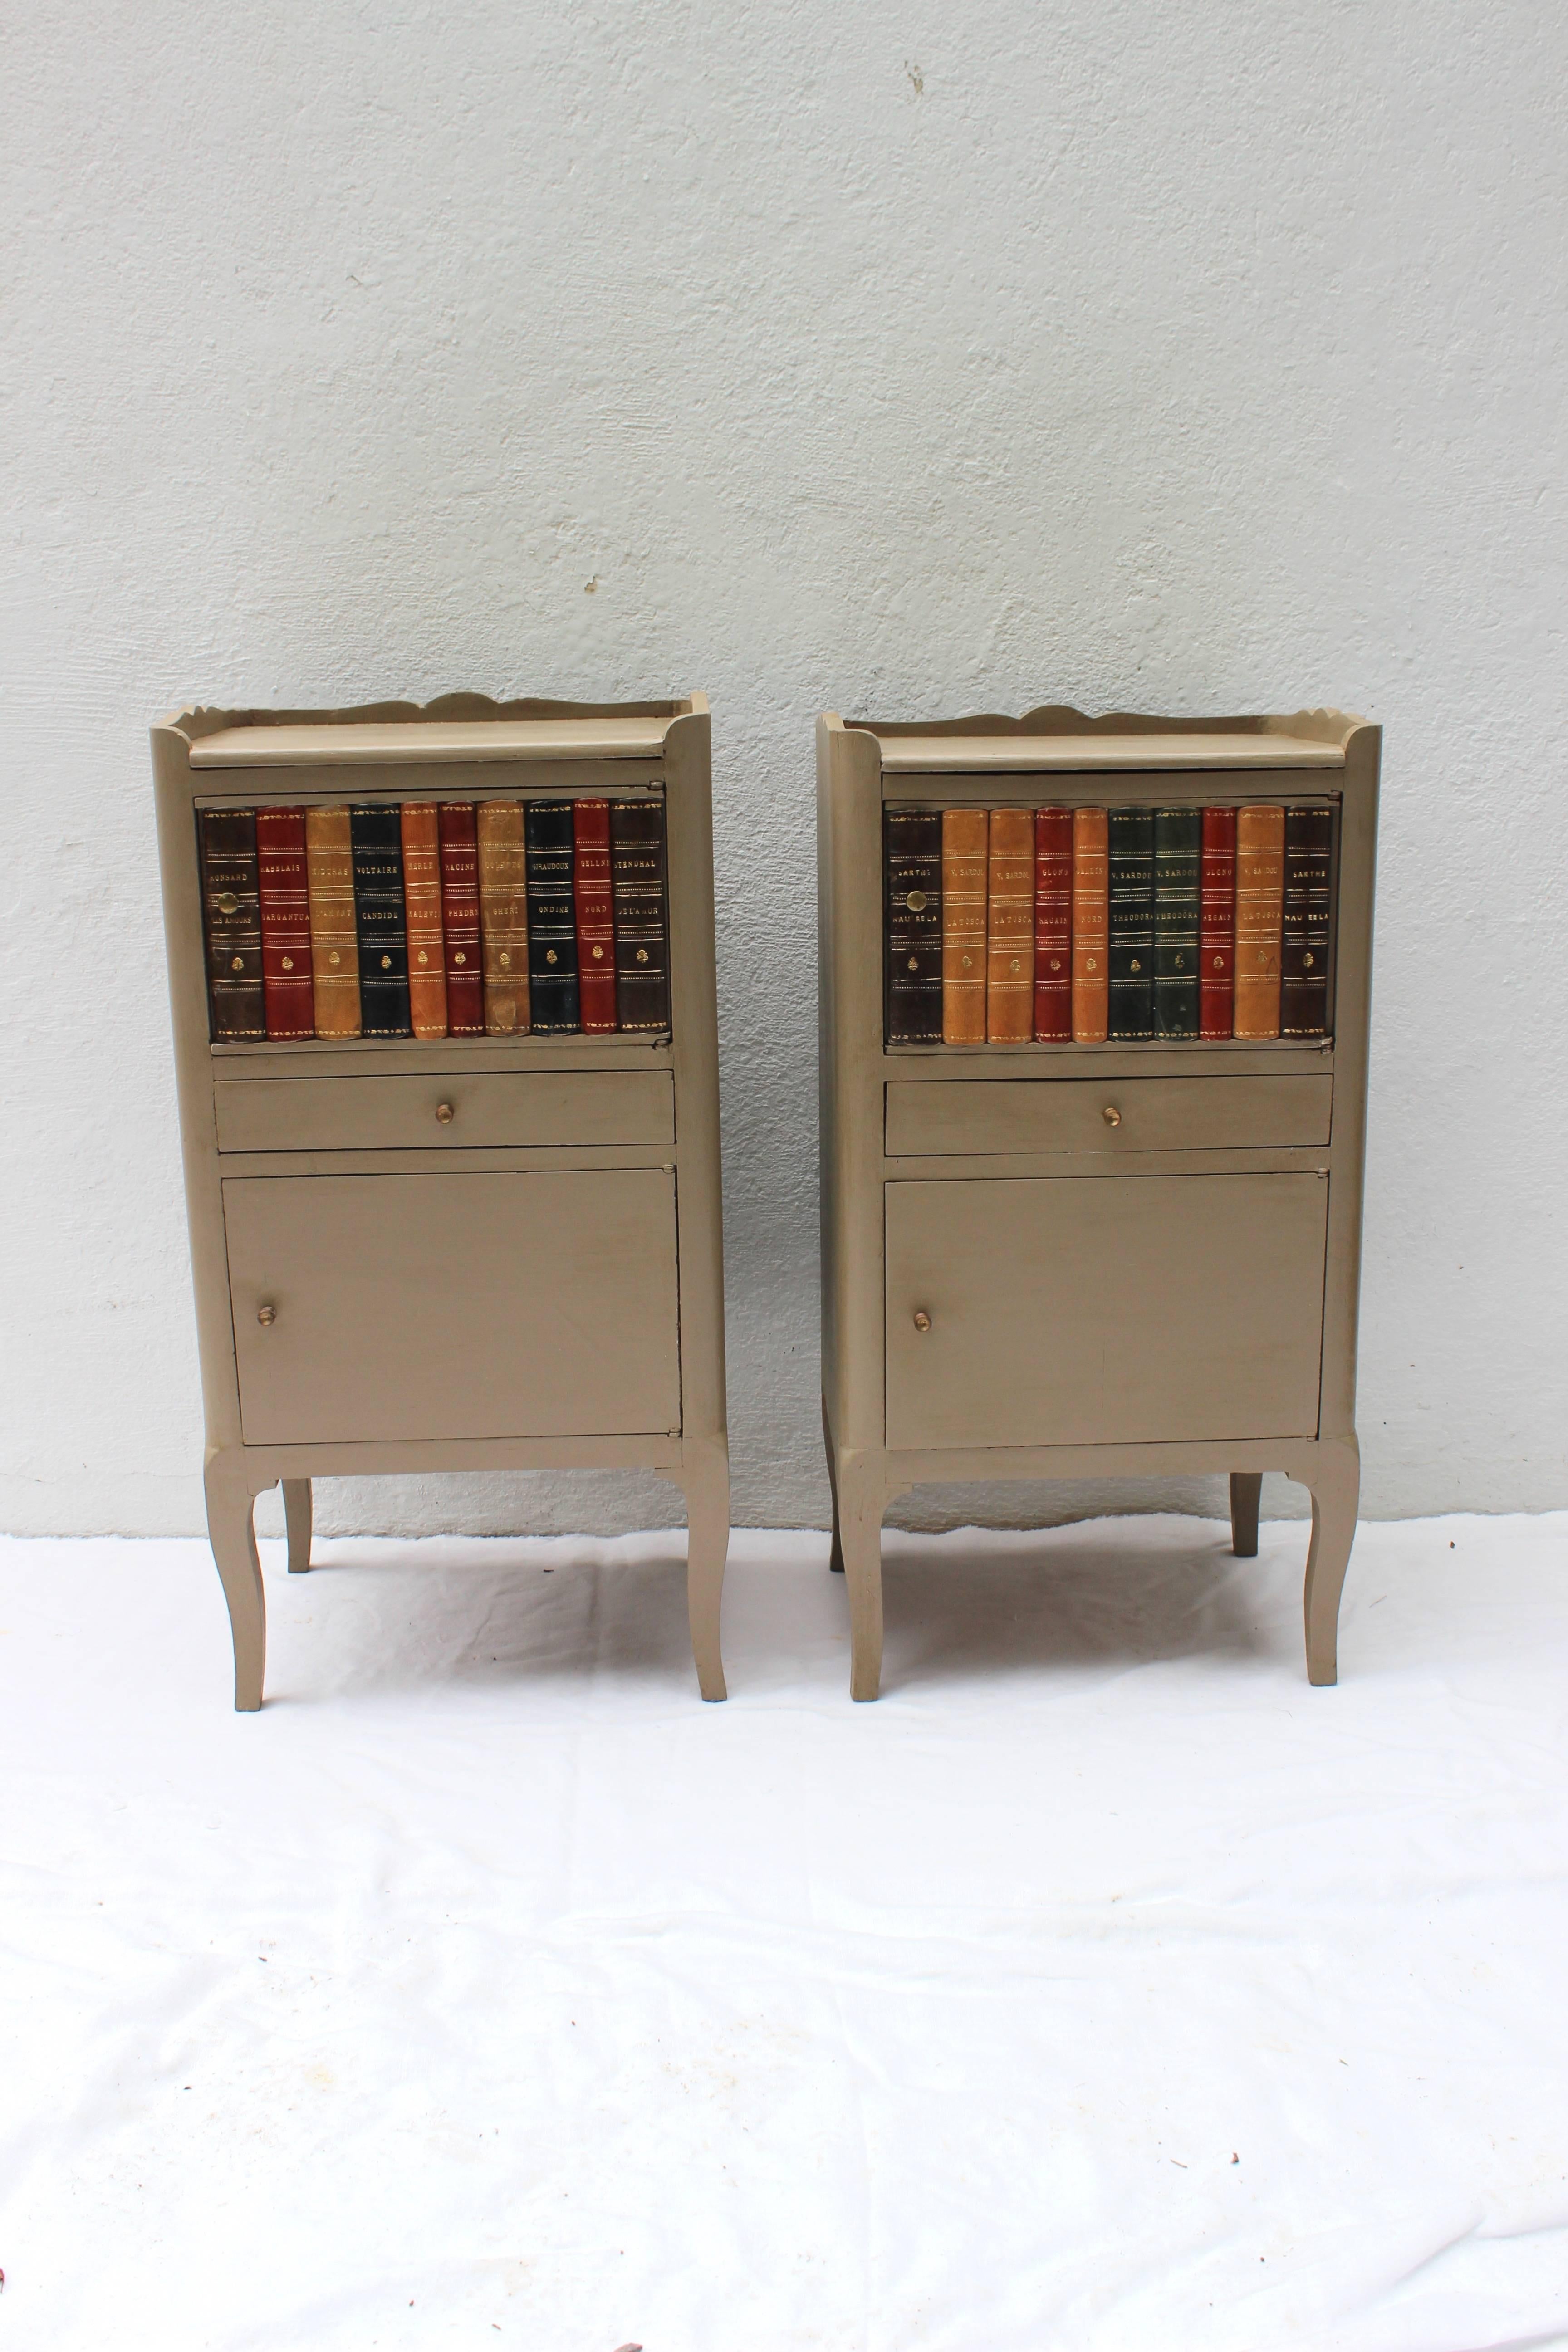 Pair of Louis XV style nightstands with book spines adhered to the doors.